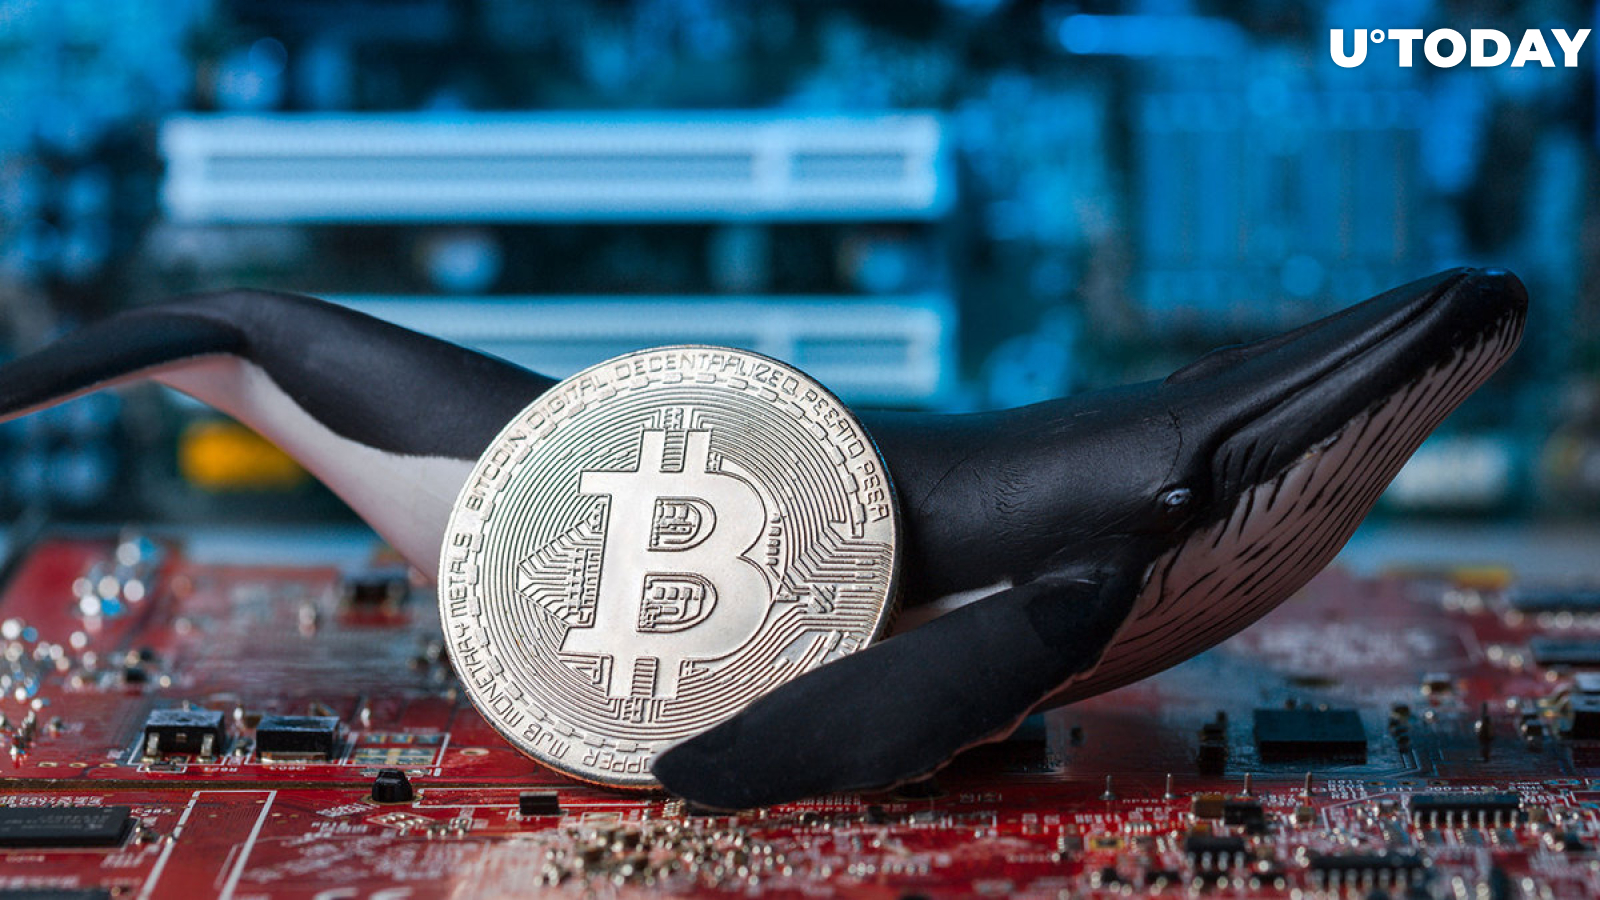 Ancient Bitcoin Whale Awakens by Moving Part of $160 Million BTC